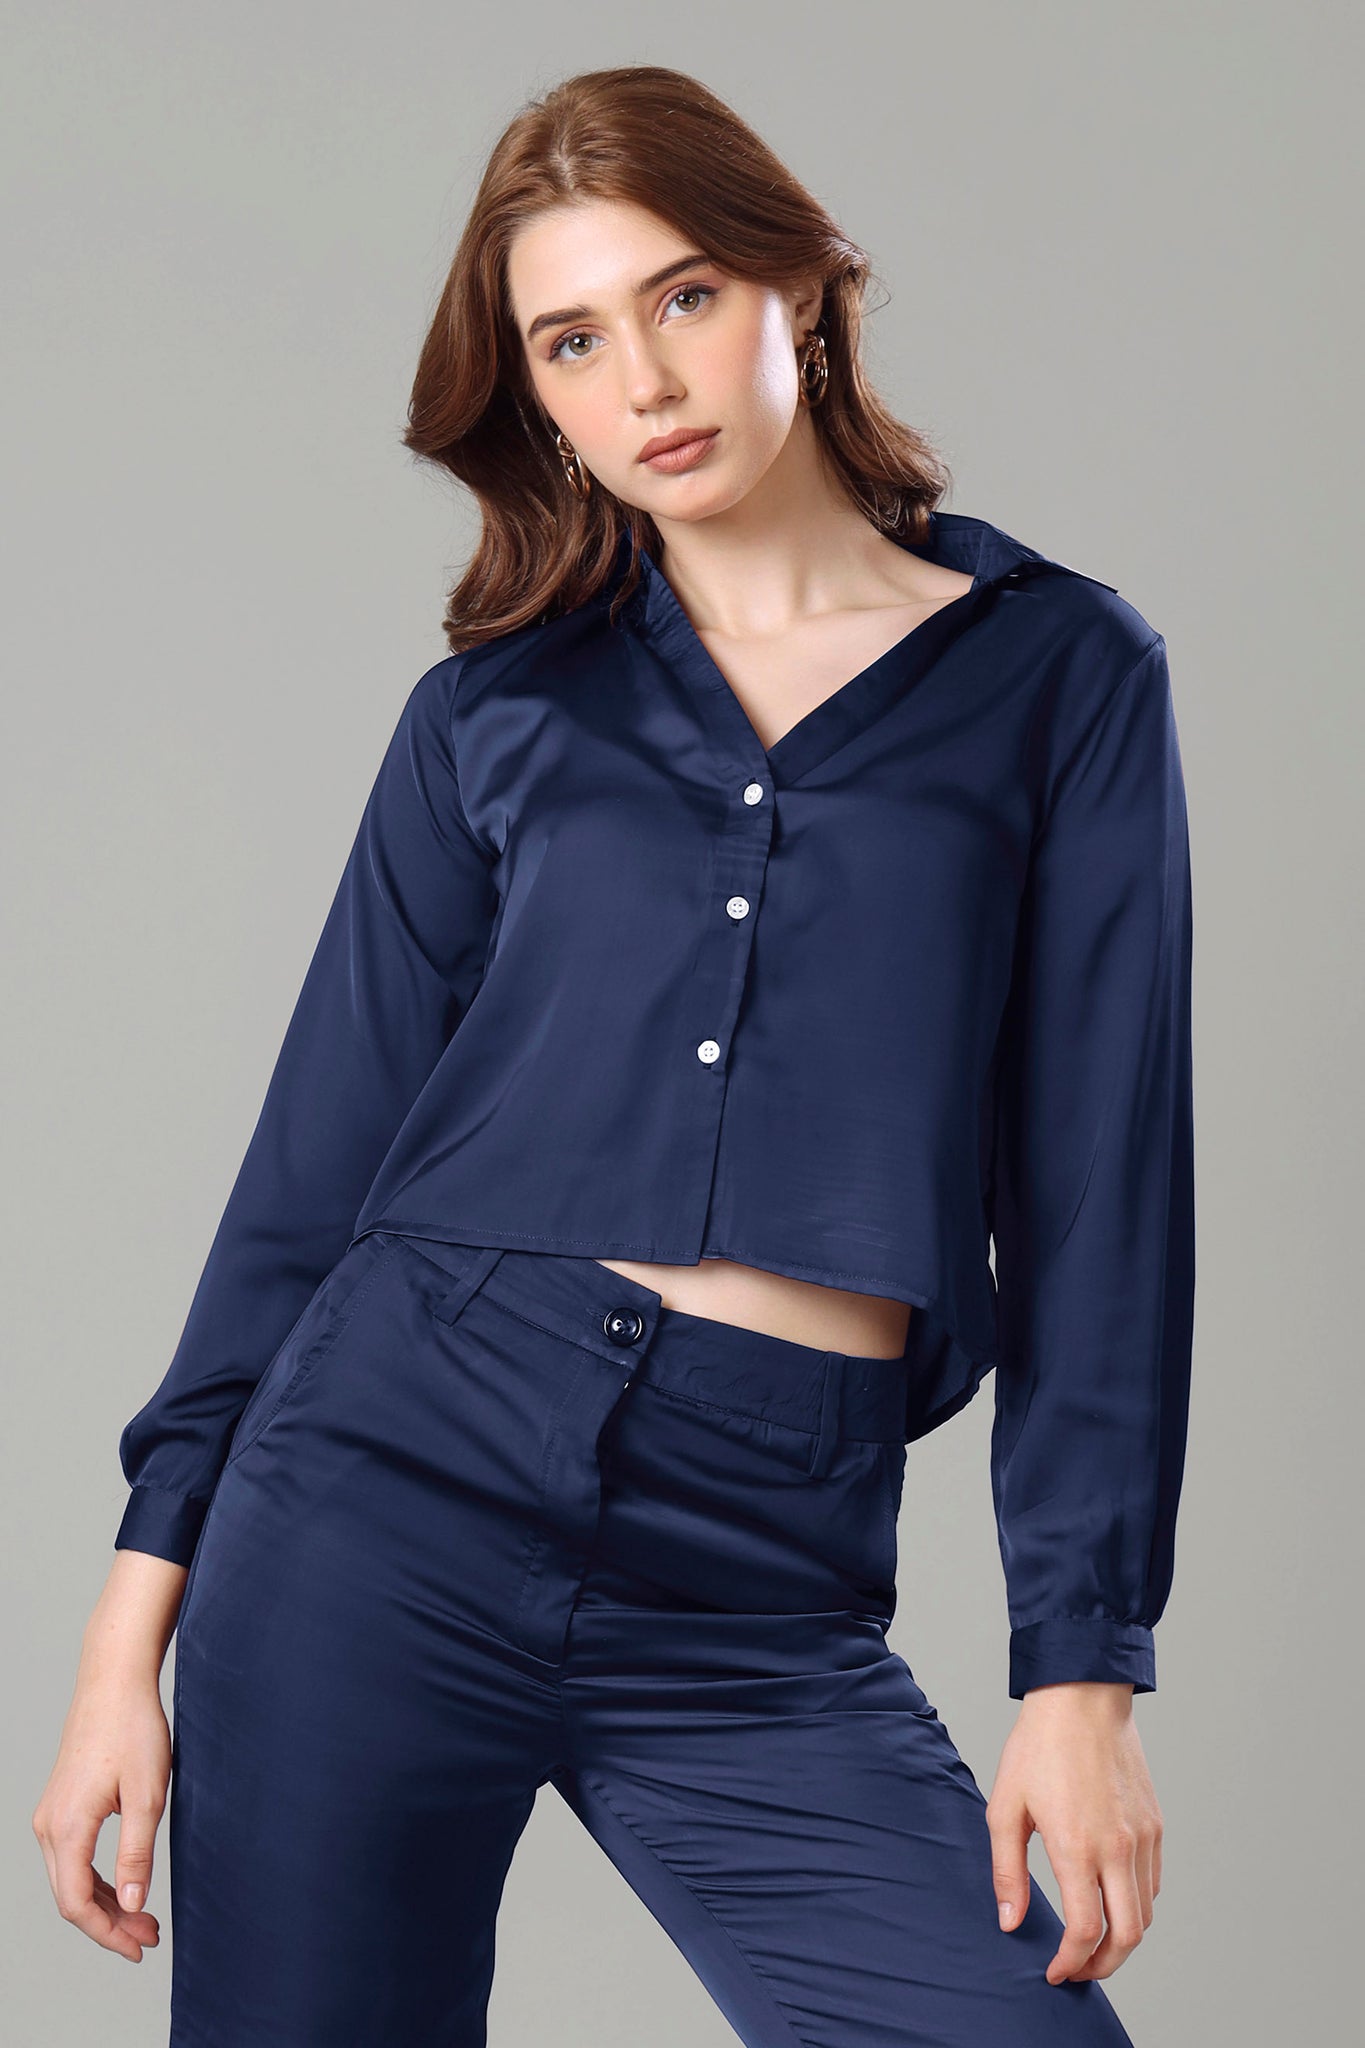 Luxurious Navy Blue Cropped Shirt For Women